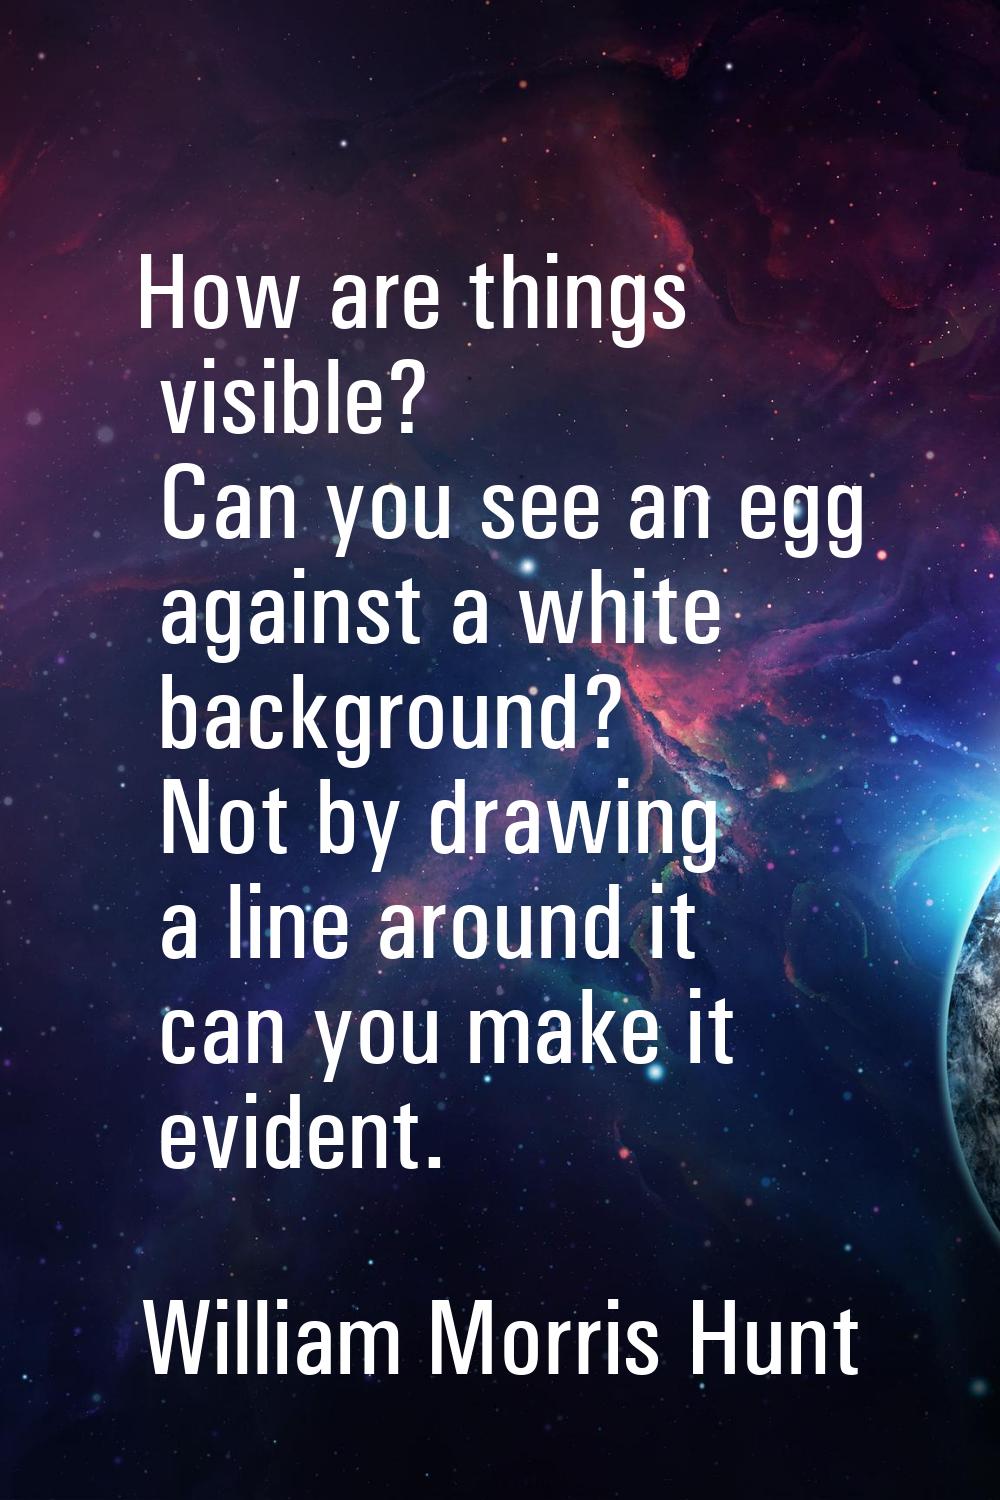 How are things visible? Can you see an egg against a white background? Not by drawing a line around